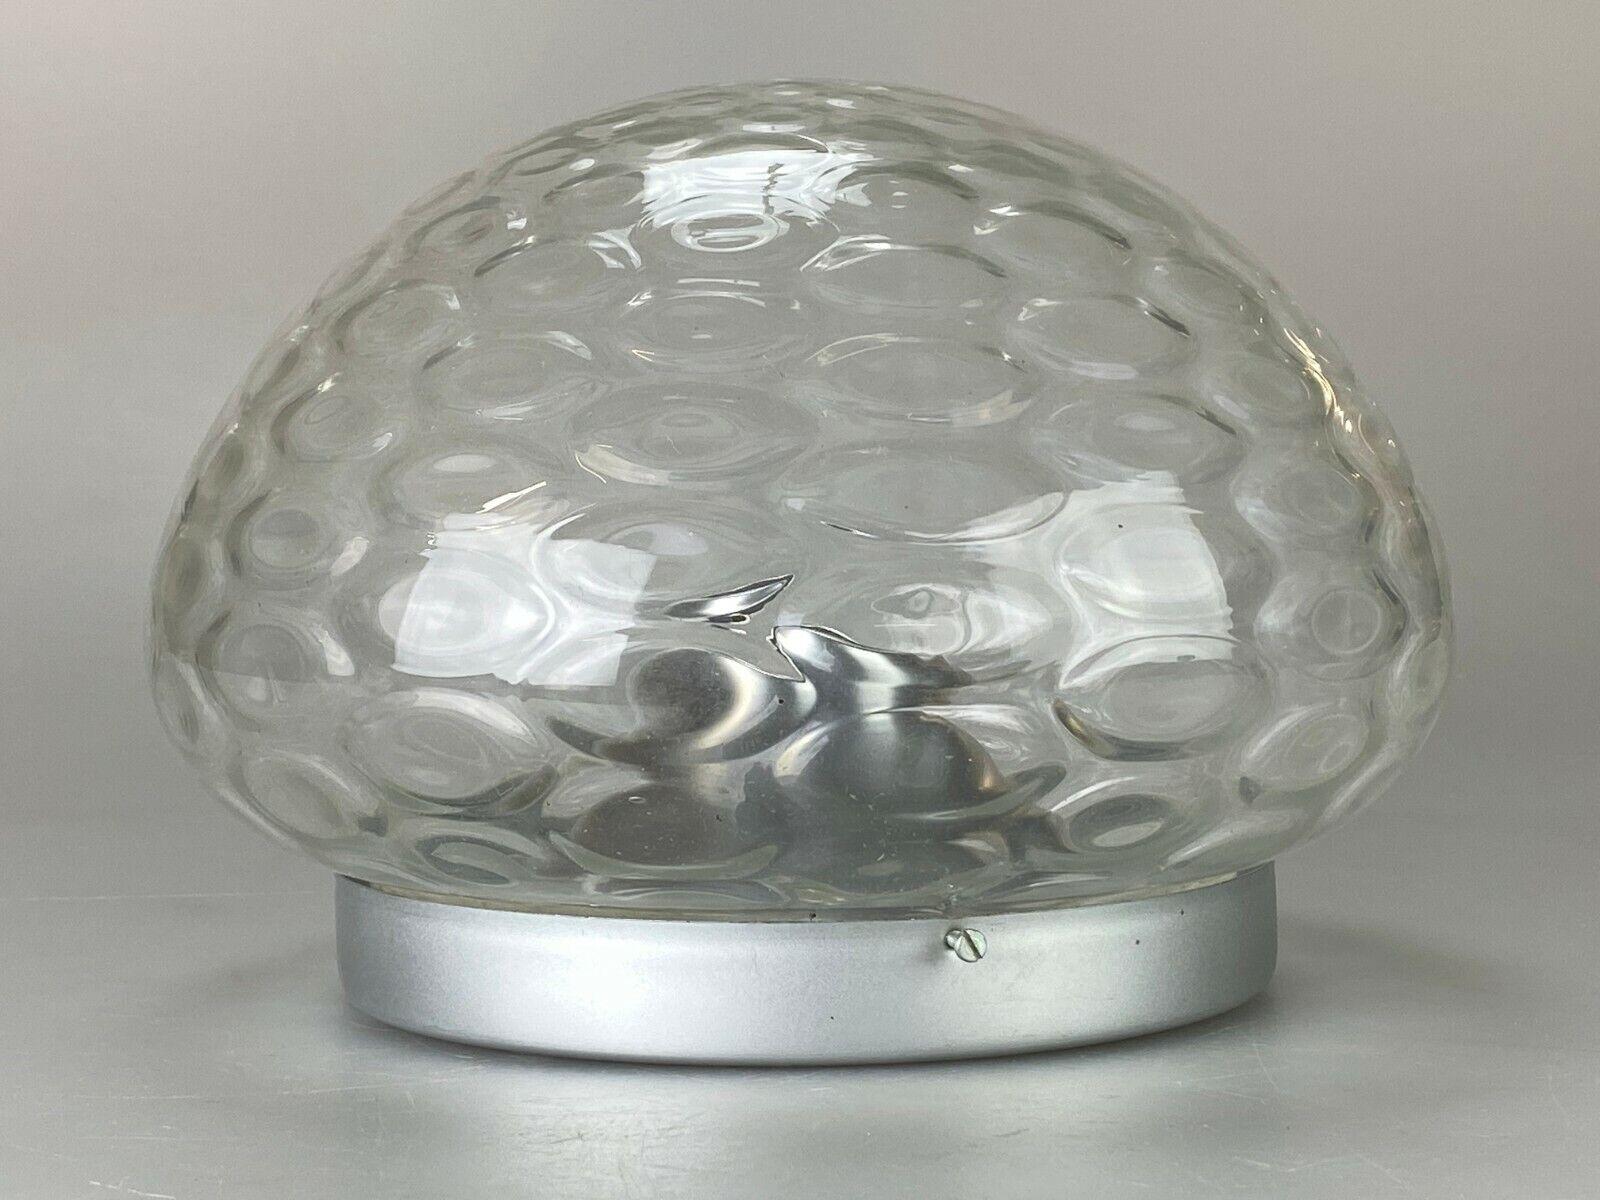 60s 70s Lamp Plafoniere Flush Mount Glass Space Age Design 60s

Object: plafoniere

Manufacturer:

Condition: good

Age: around 1960-1970

Dimensions:

Diameter = 24.5cm
Height = 18cm

Other notes:

The pictures serve as part of the